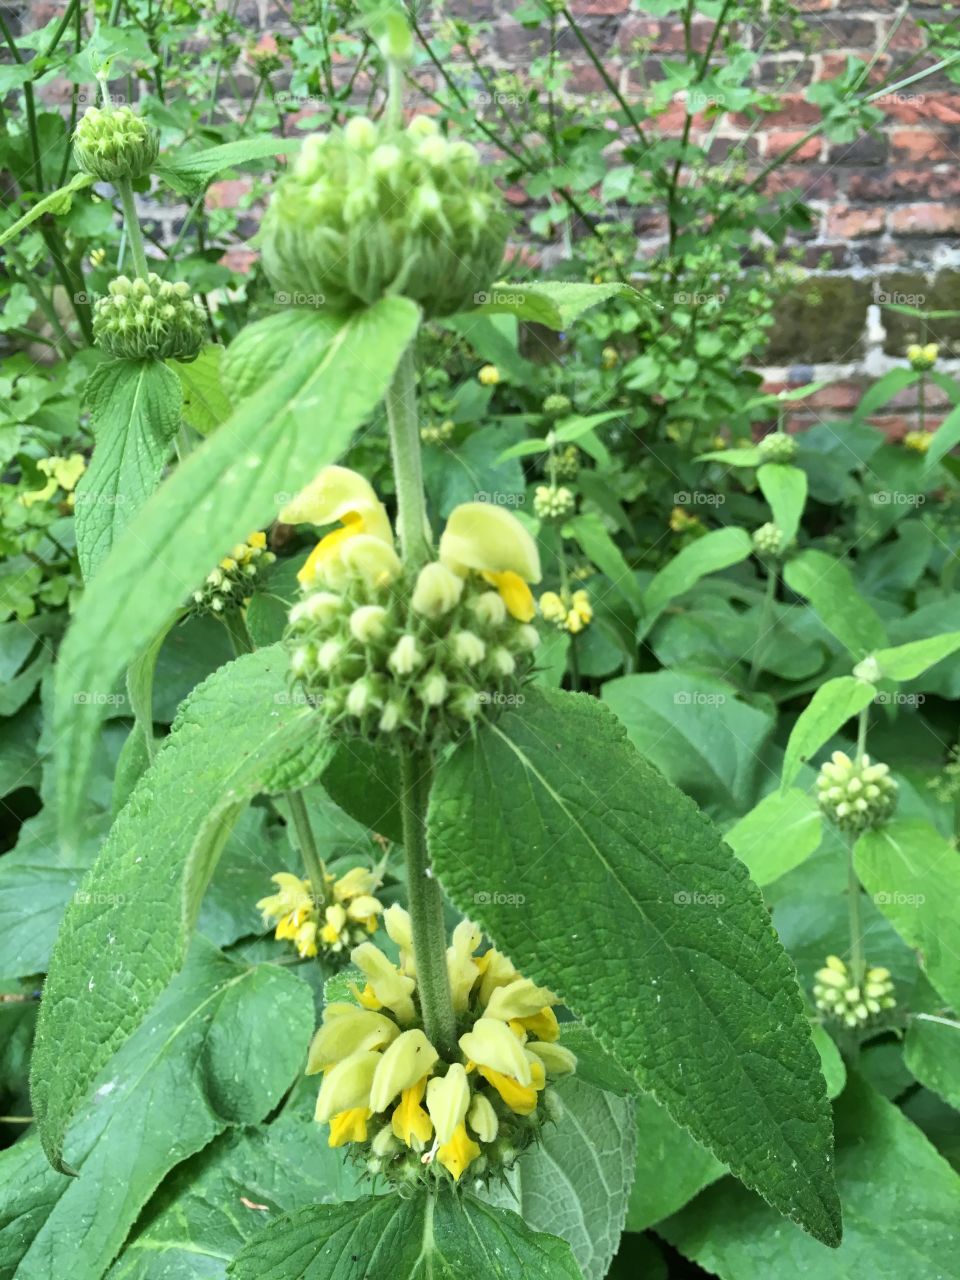 Close up view of yellow flowers on Phlomis plant in a garden against medieval brick wall